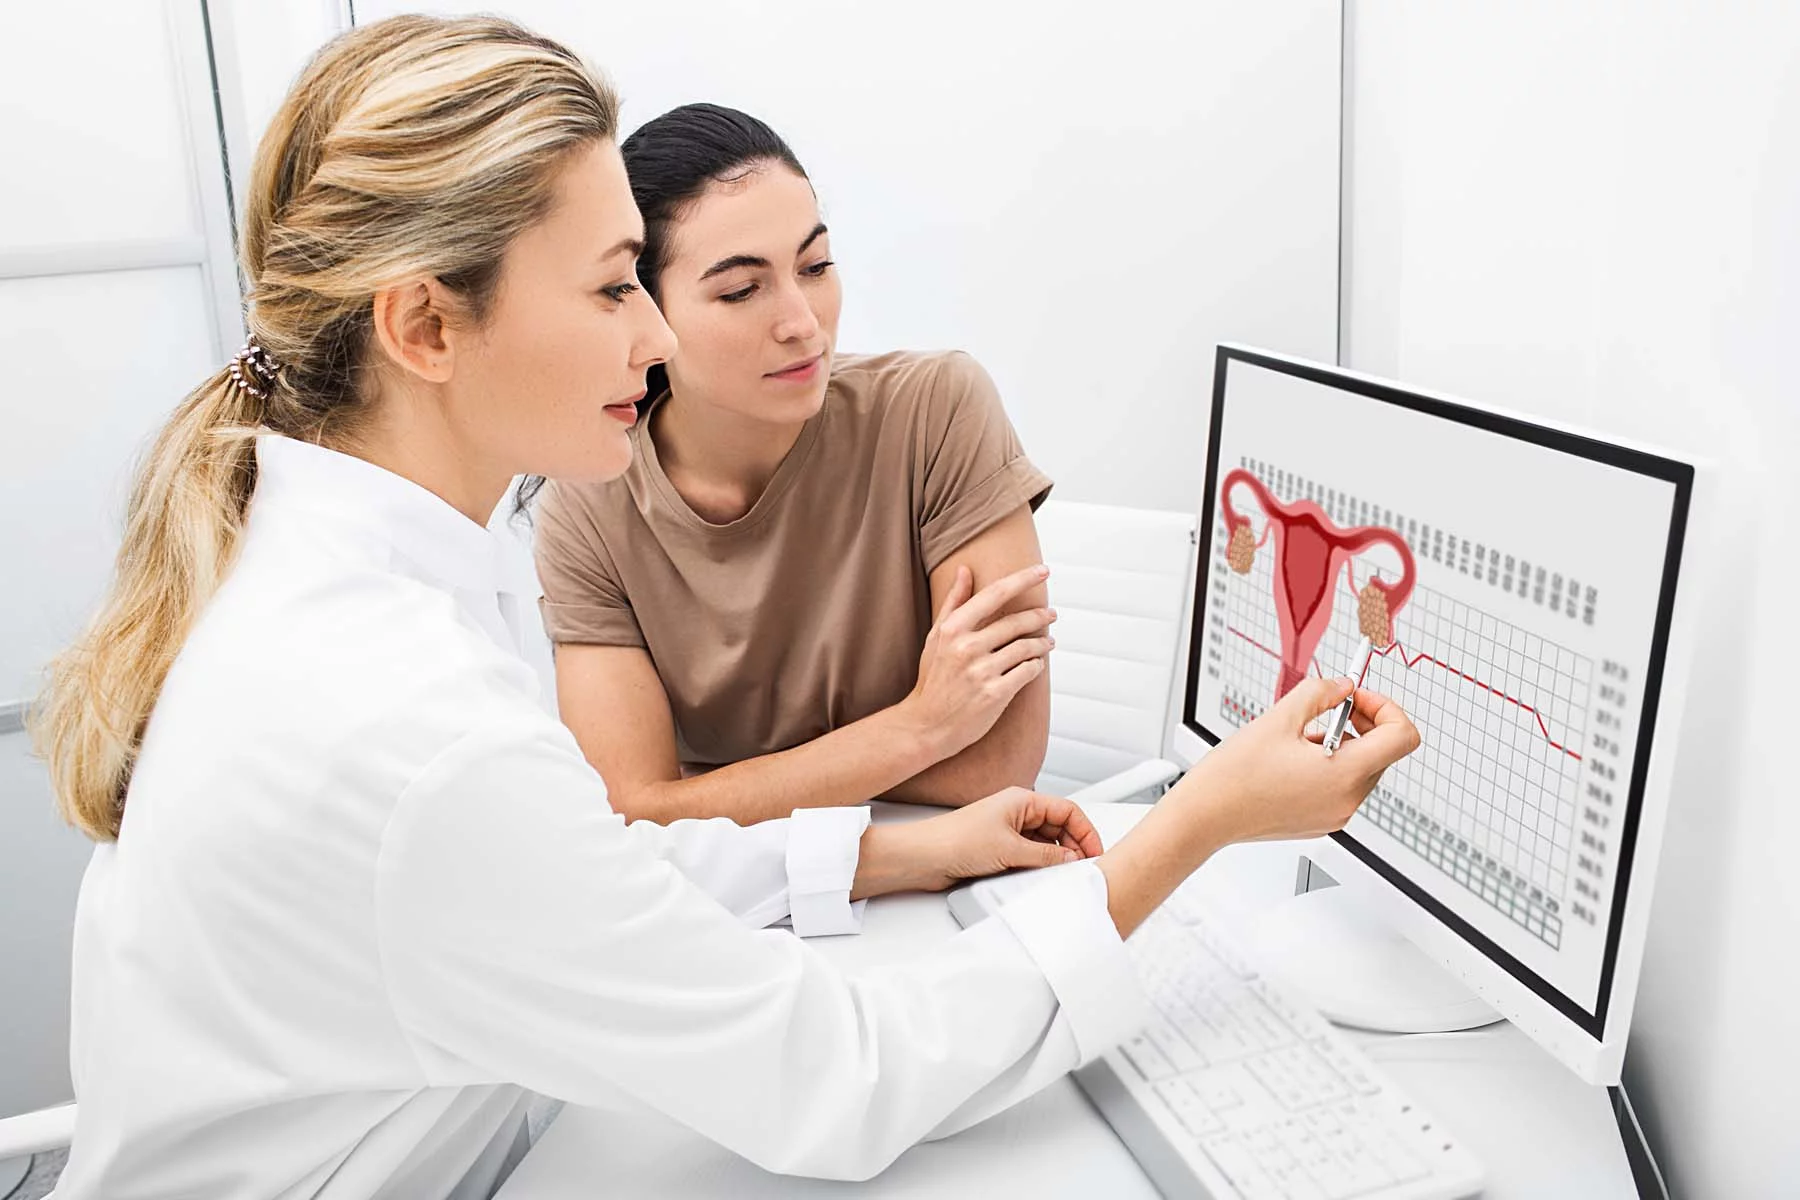 gynecologist showing female patient information on screen